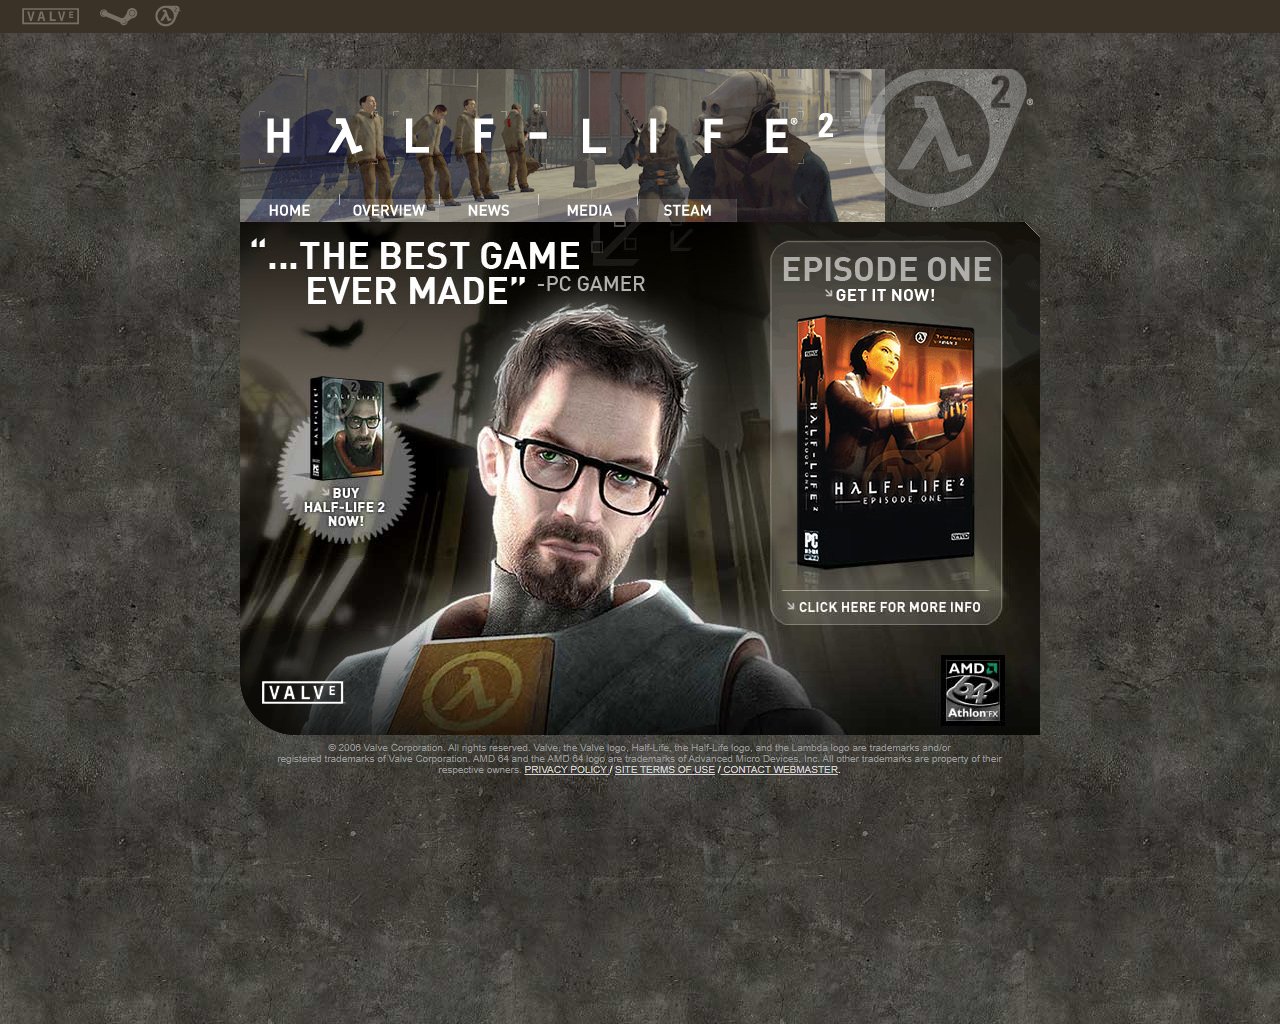 Valve's updated Half-Life 2 website home page, circa 2006. Similar to the previous versions, but with a quote by gaming publication PC Gamer praising Half-Life 2 as the best game ever made, with a link to buy Half-Life 2 now and an image of the Half-Life 2: Episode One cover, with a link to the Half-Life 2: Episode One website.